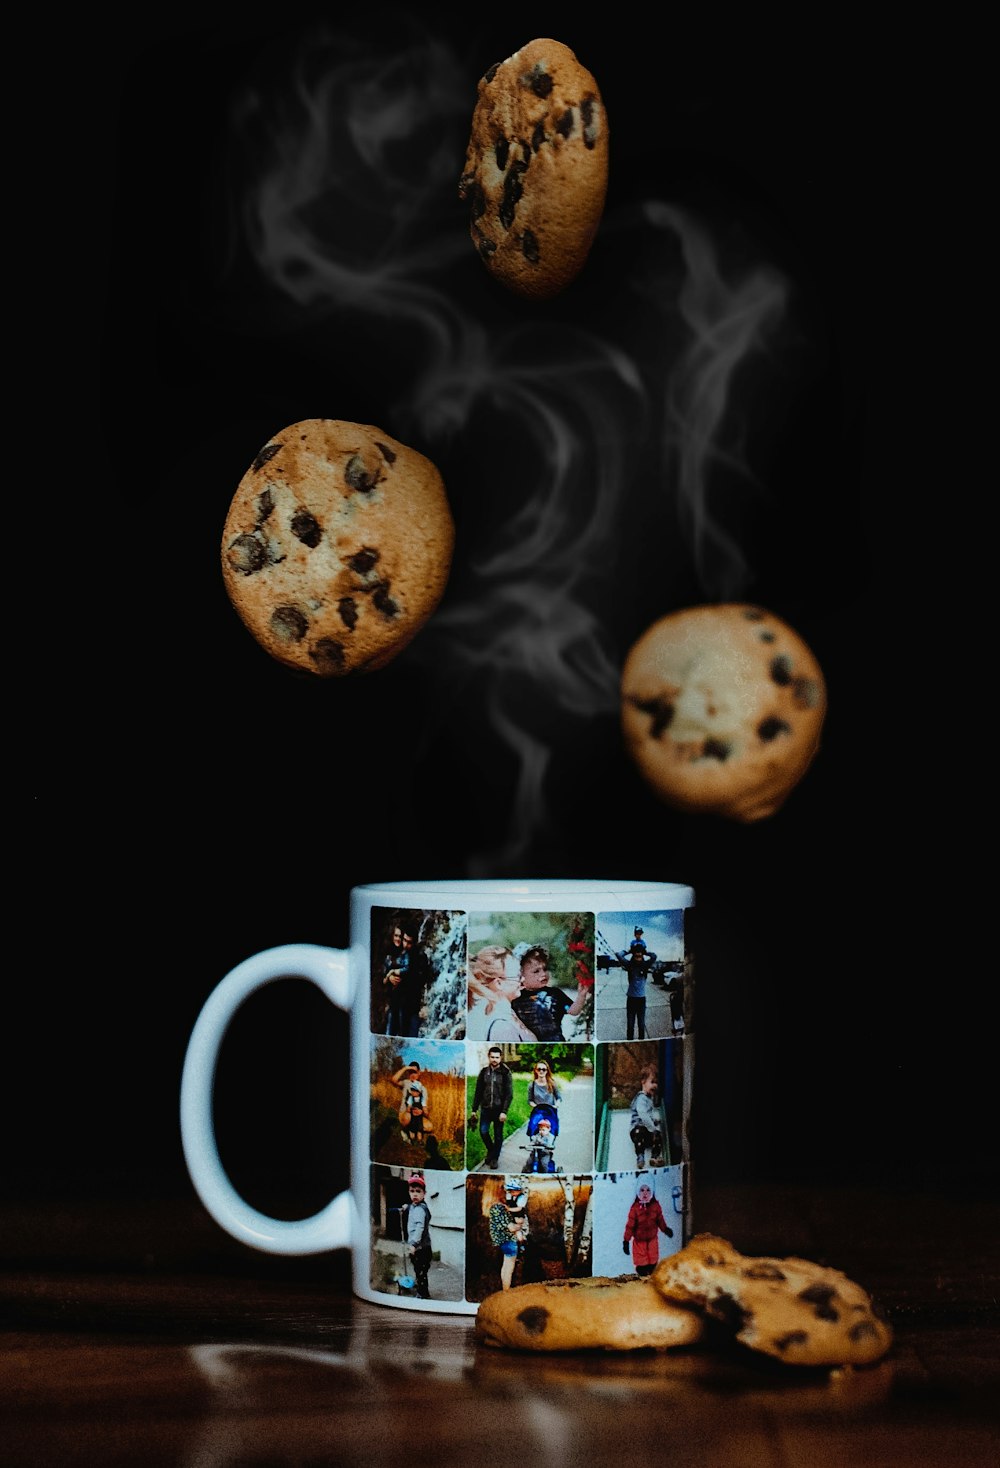 ceramic mug on brown surface with cookies